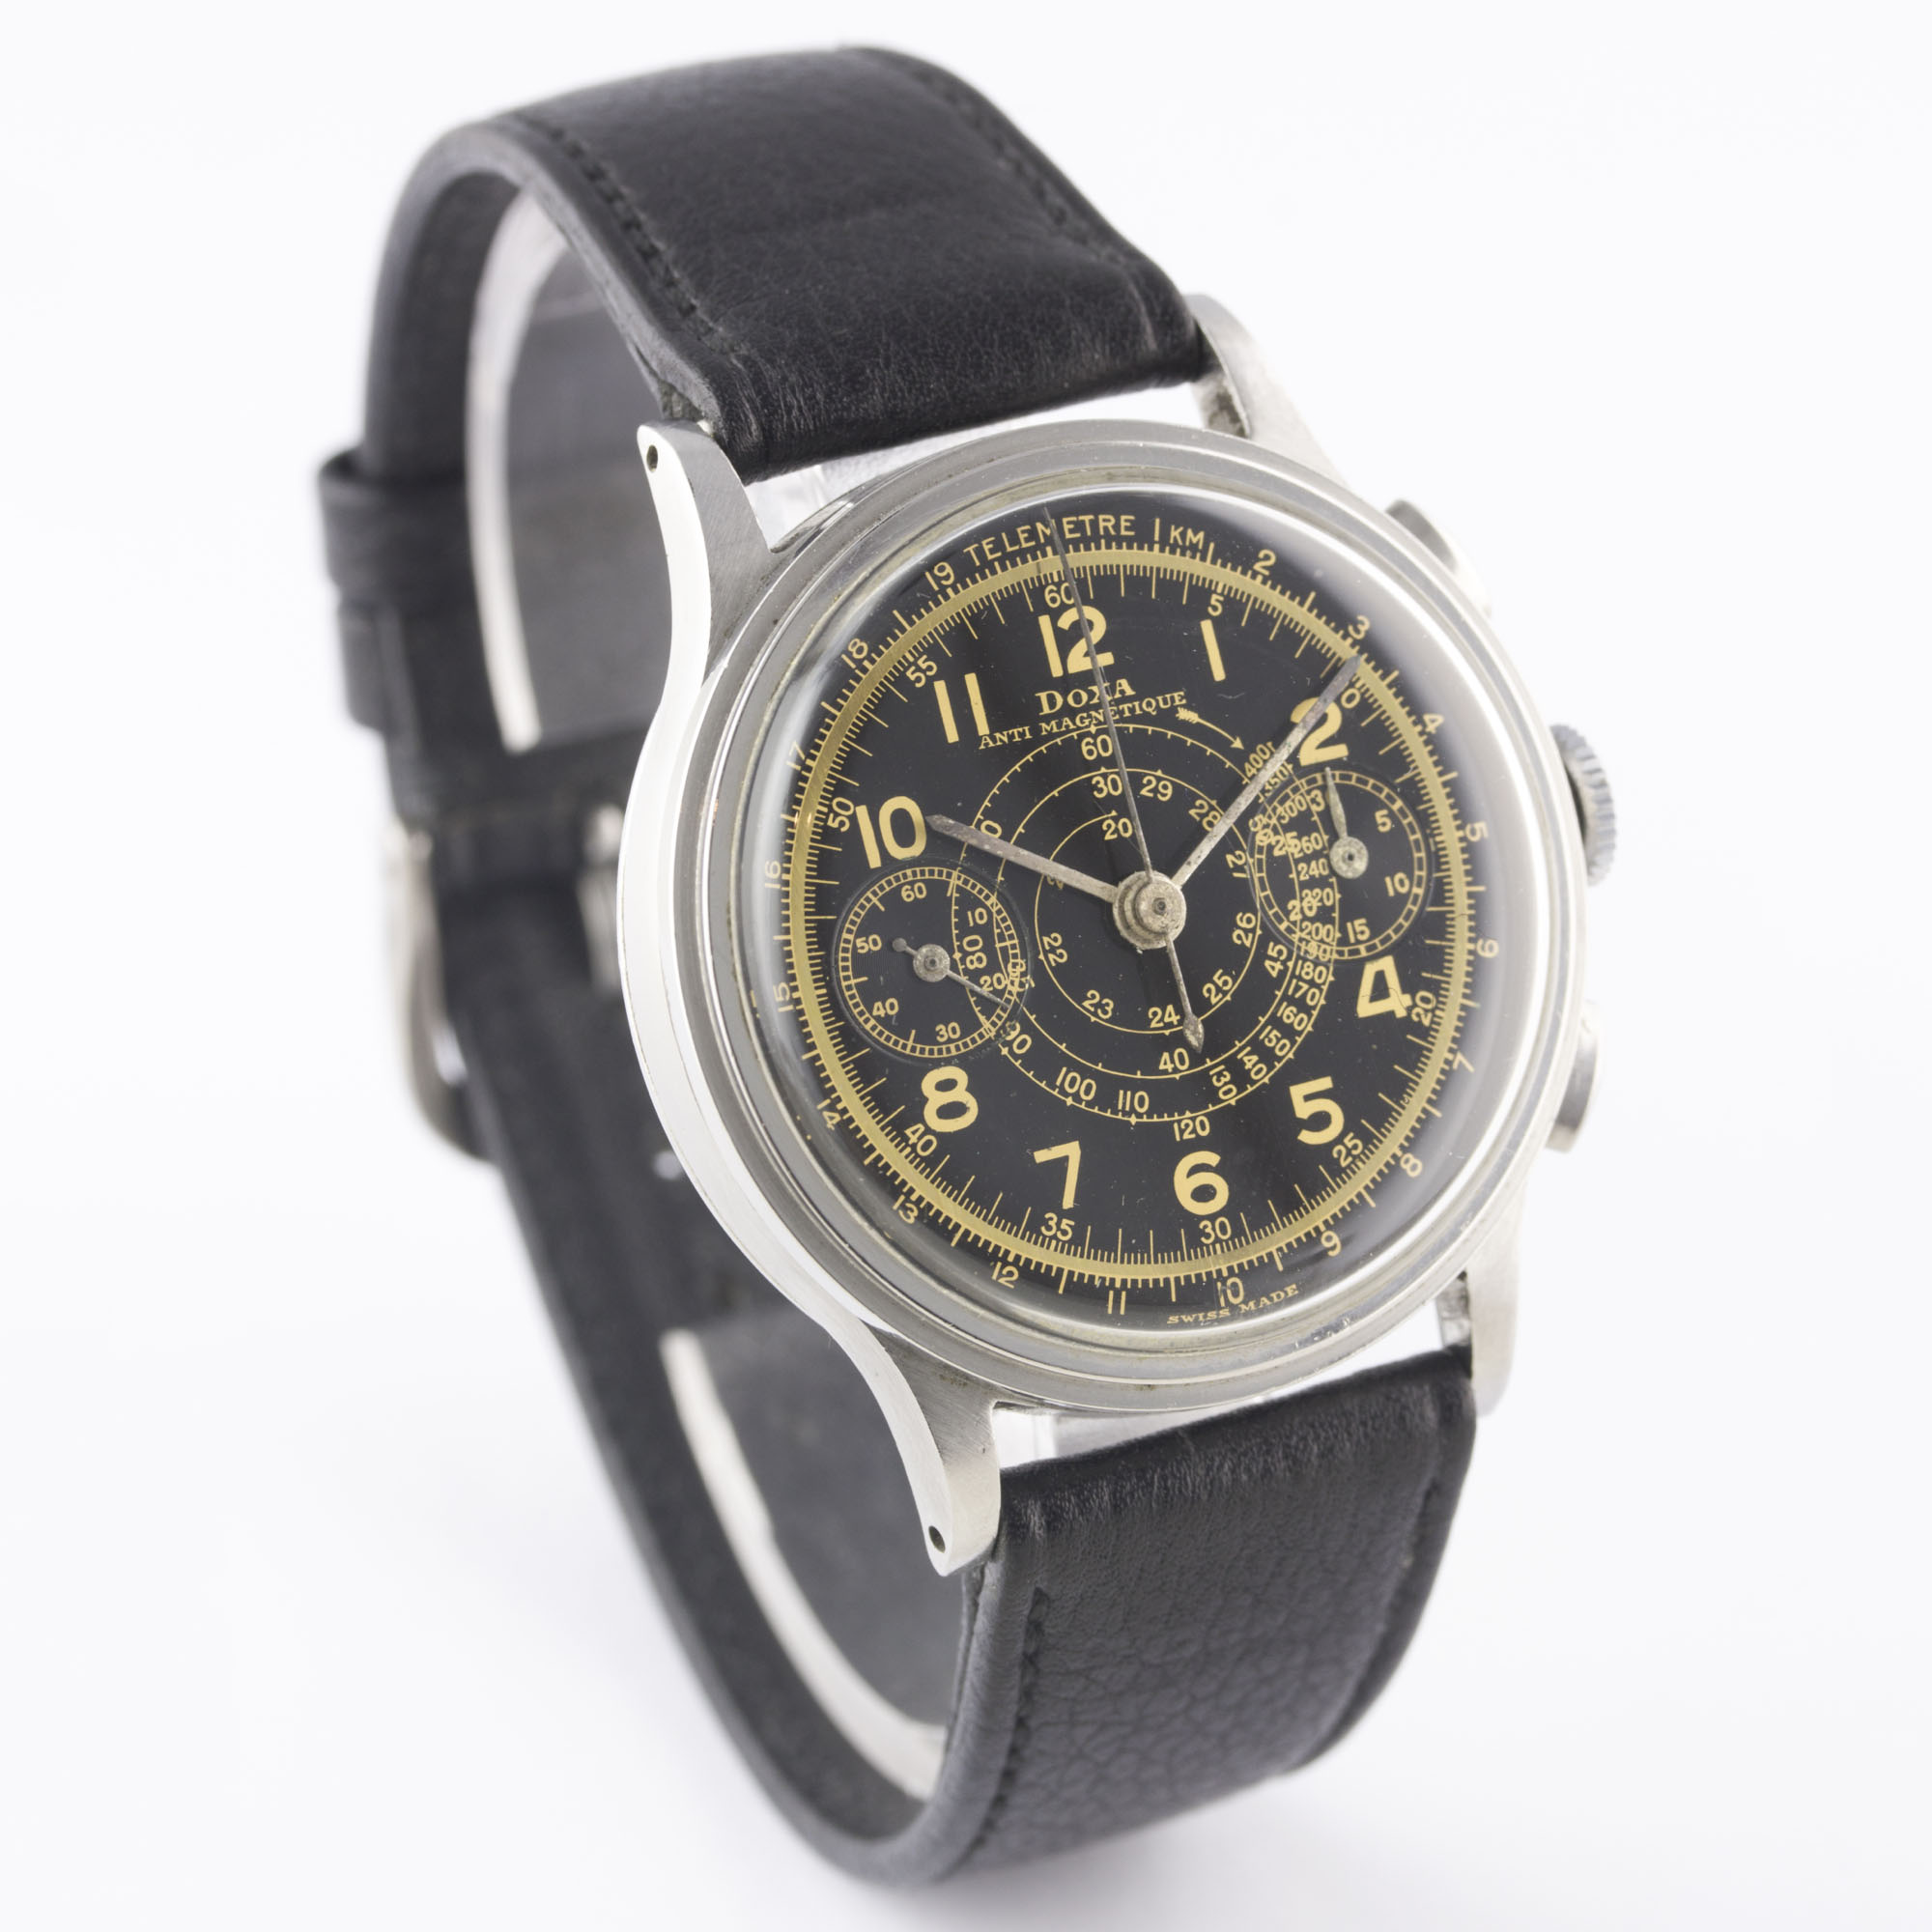 A RARE GENTLEMAN'S LARGE SIZE STAINLESS STEEL DOXA CHRONOGRAPH WRIST WATCH CIRCA 1940s, WITH GLOSS - Image 6 of 11